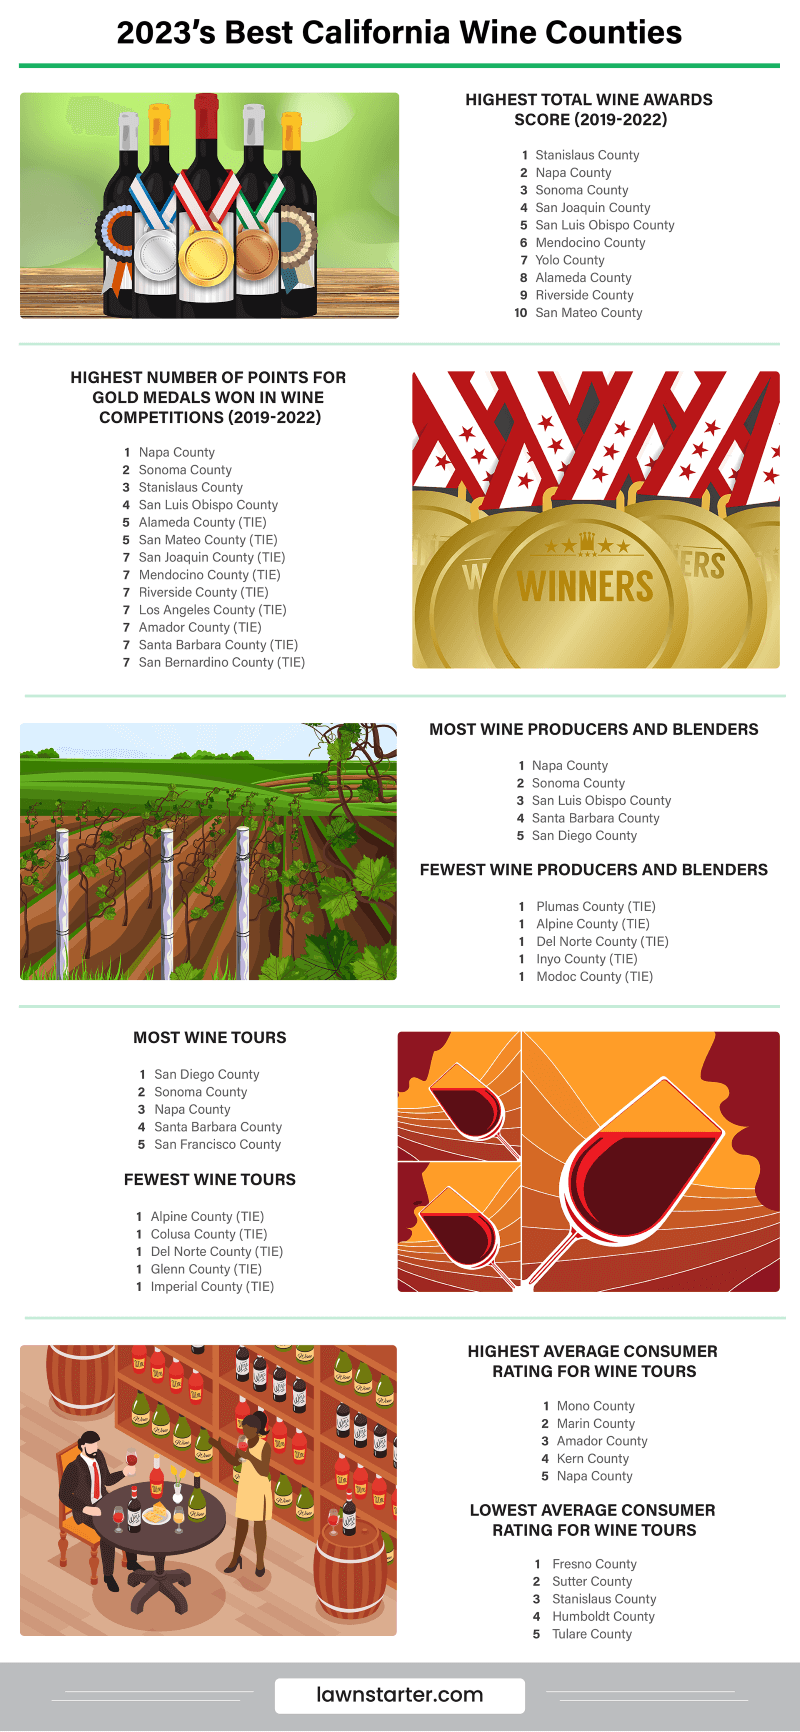 Infographic showing the Best California Wine Counties, a ranking based on access to award-winning California wines, winery tours, visitor accommodations, and more